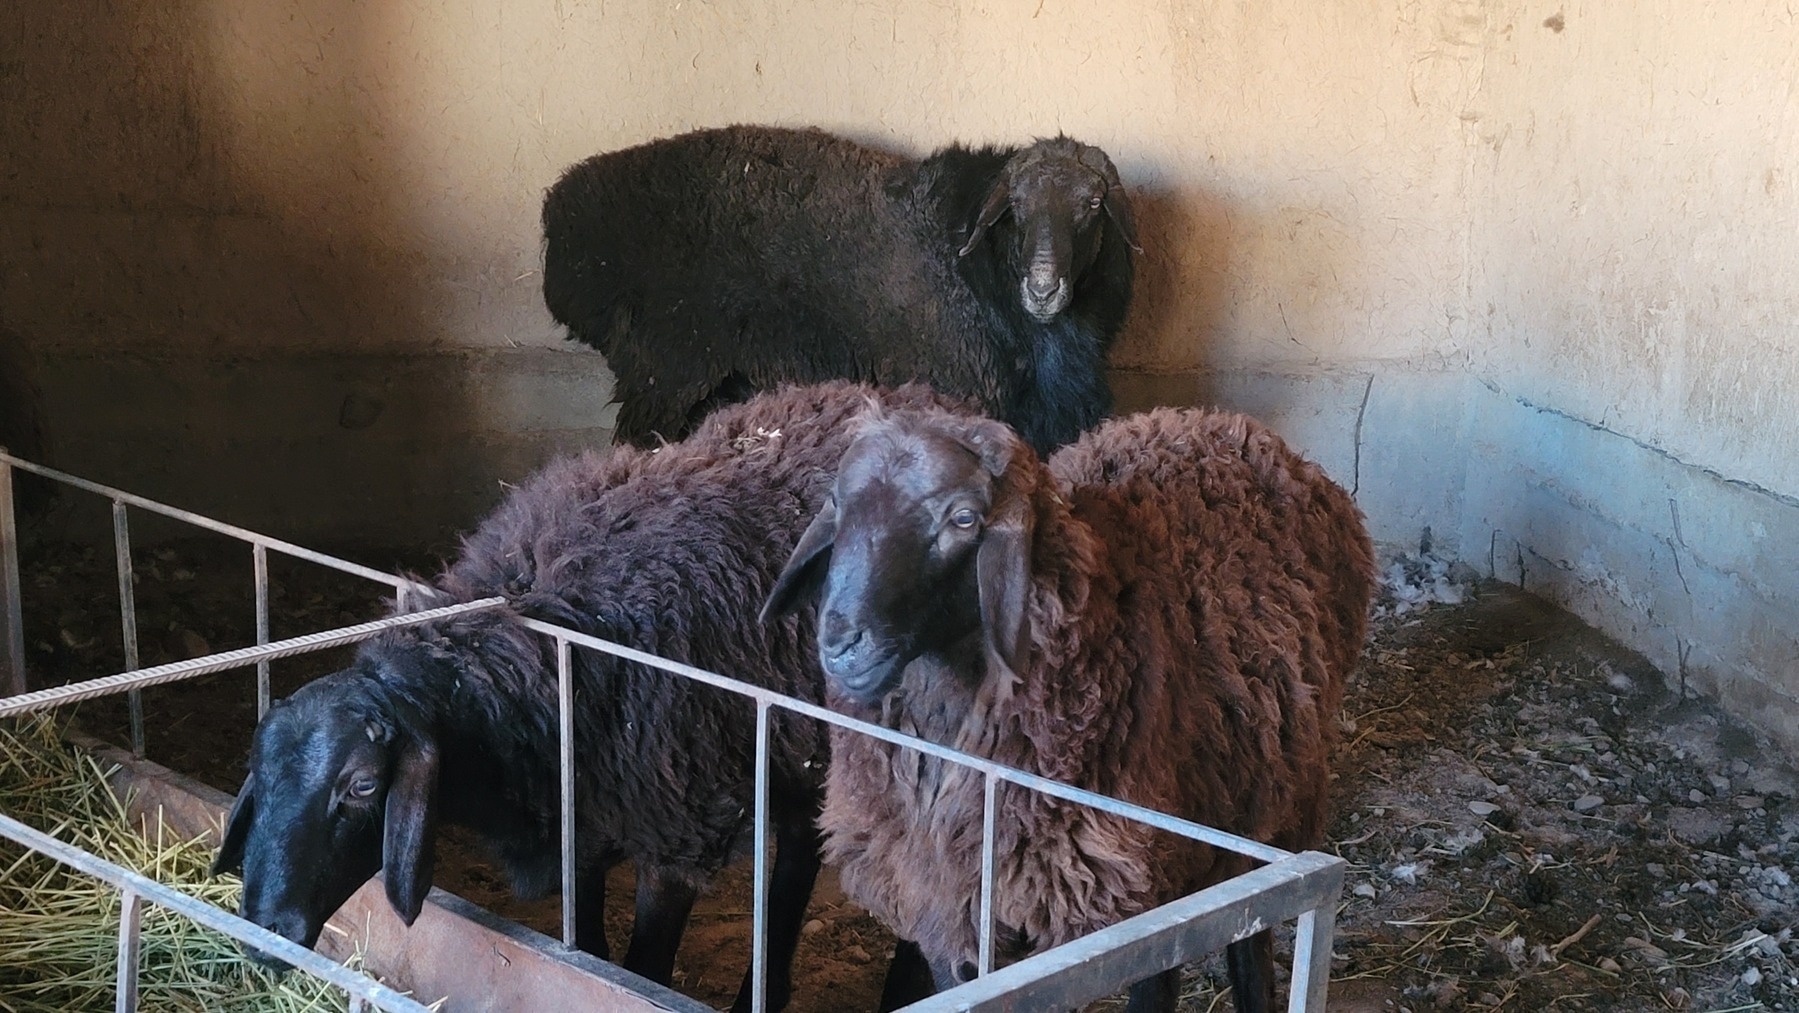 3 sheep with dark brown and black wool. 2 females (I think) and 1 larger male 